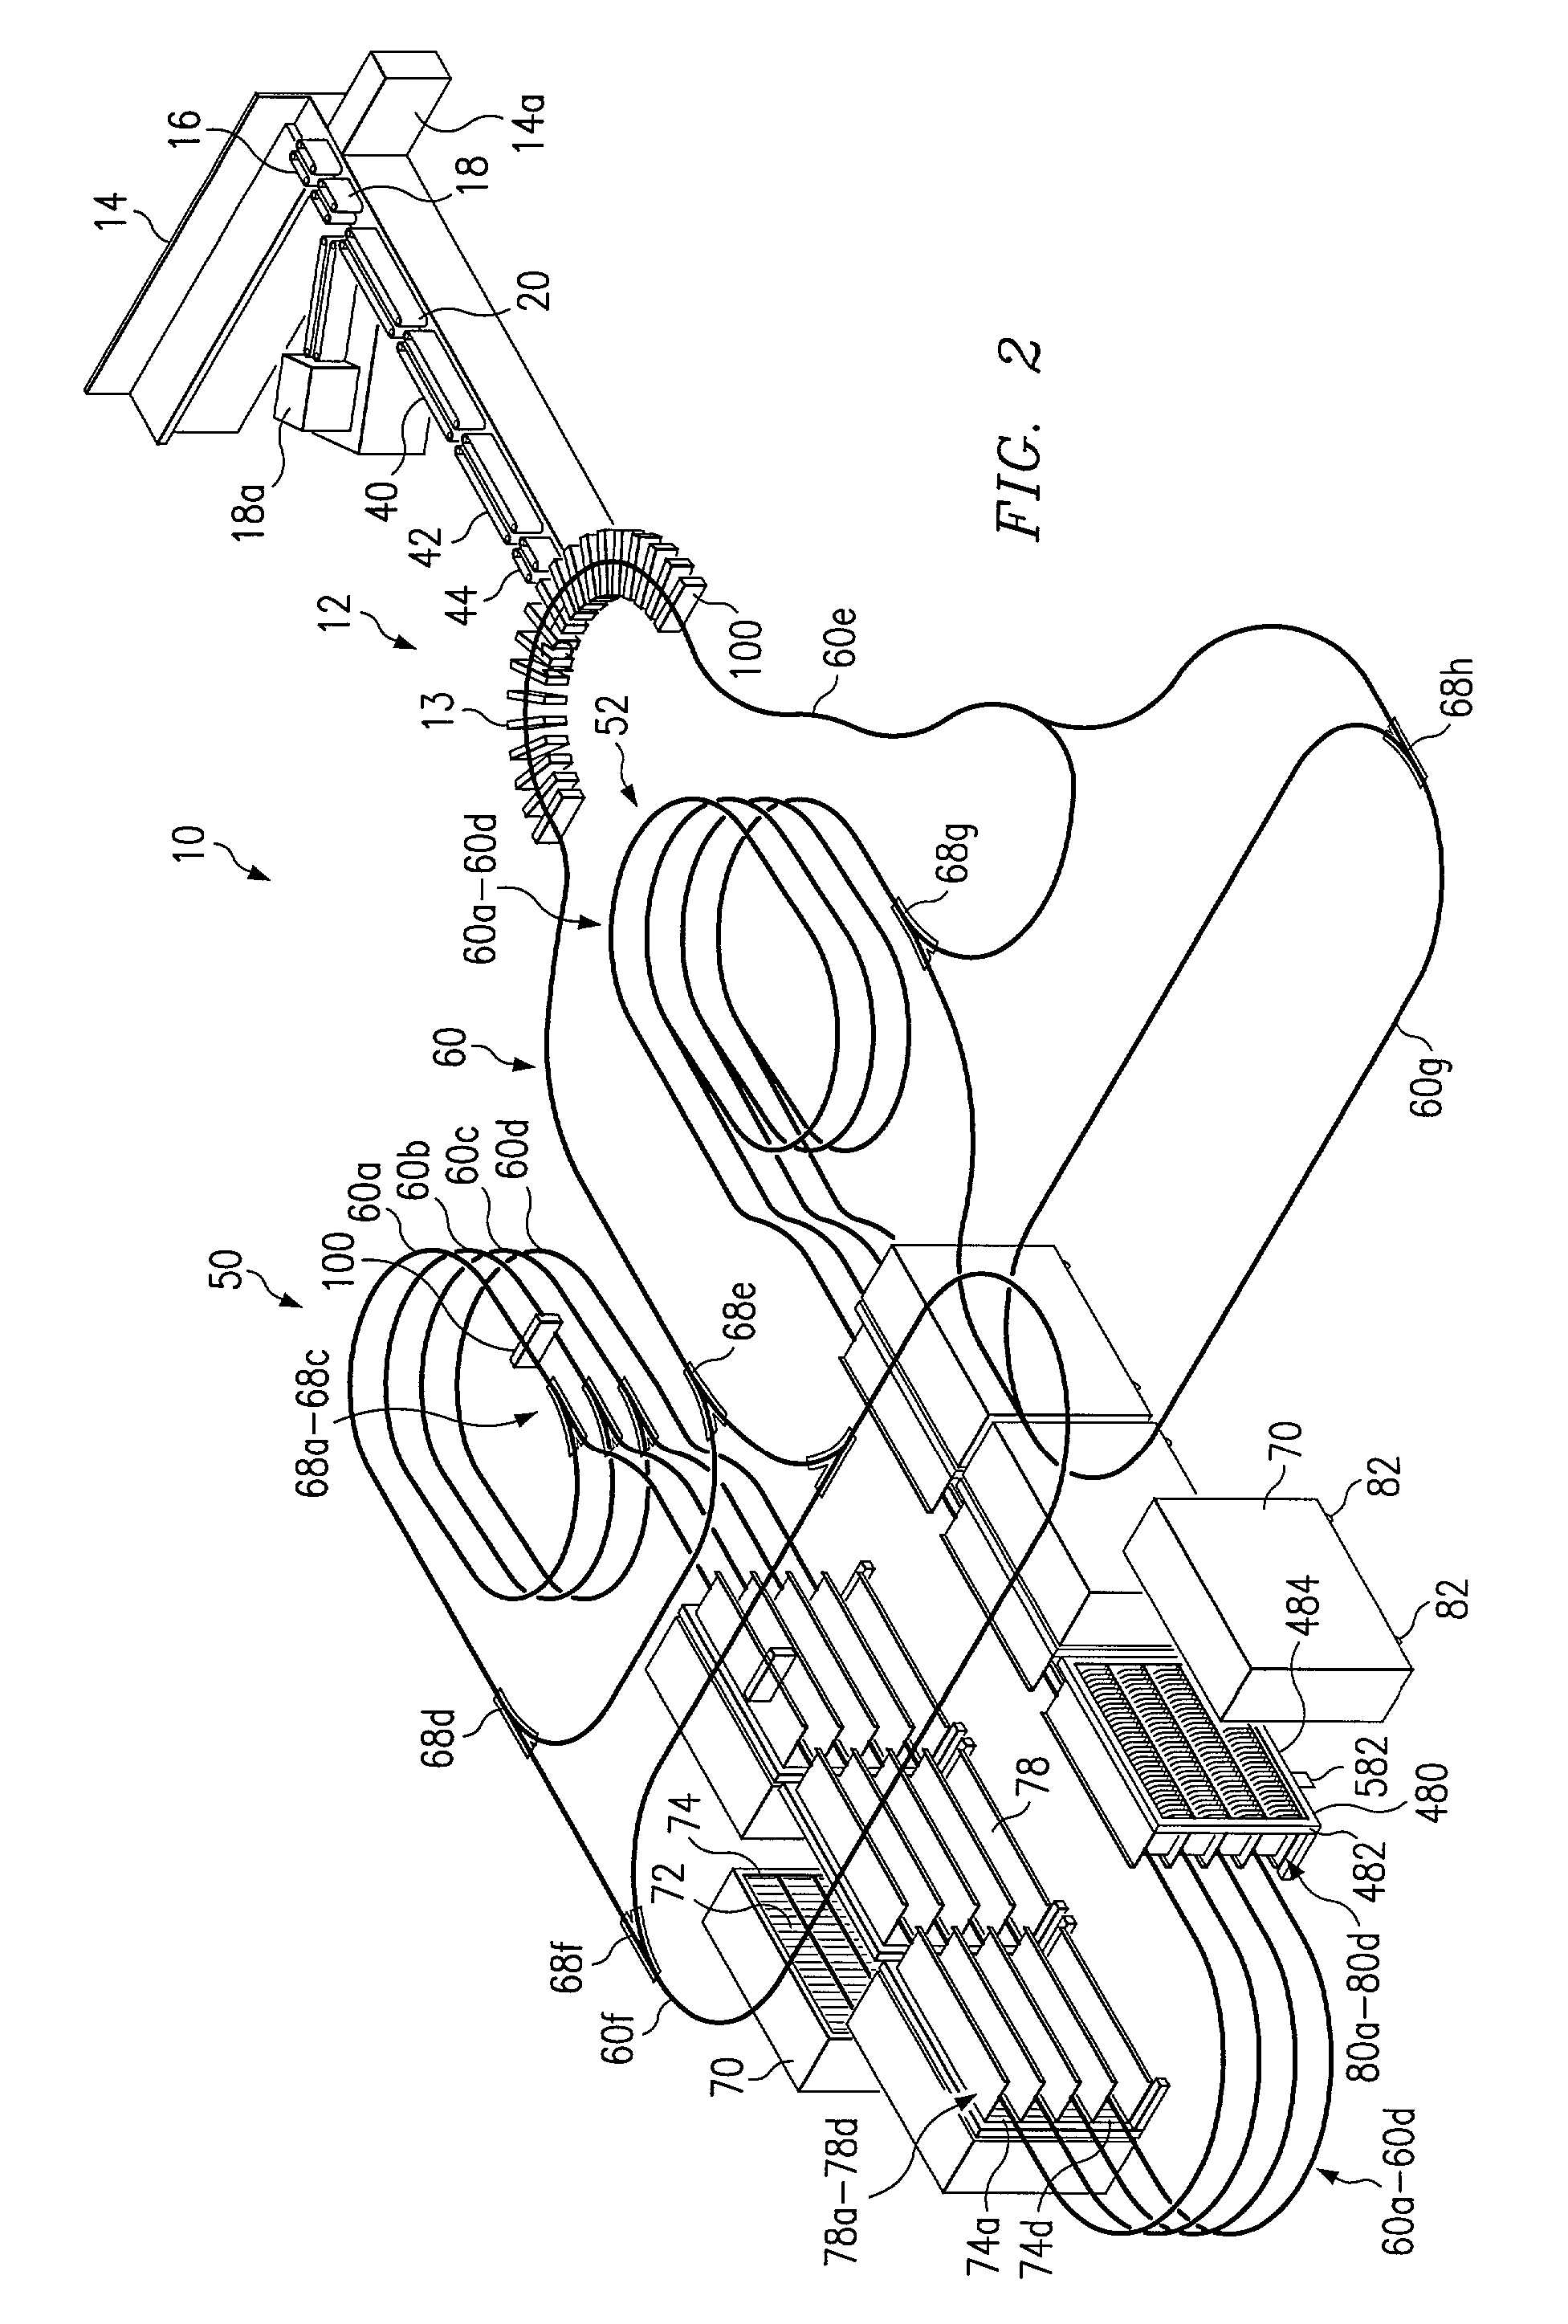 Apparatus and method for mail sorting